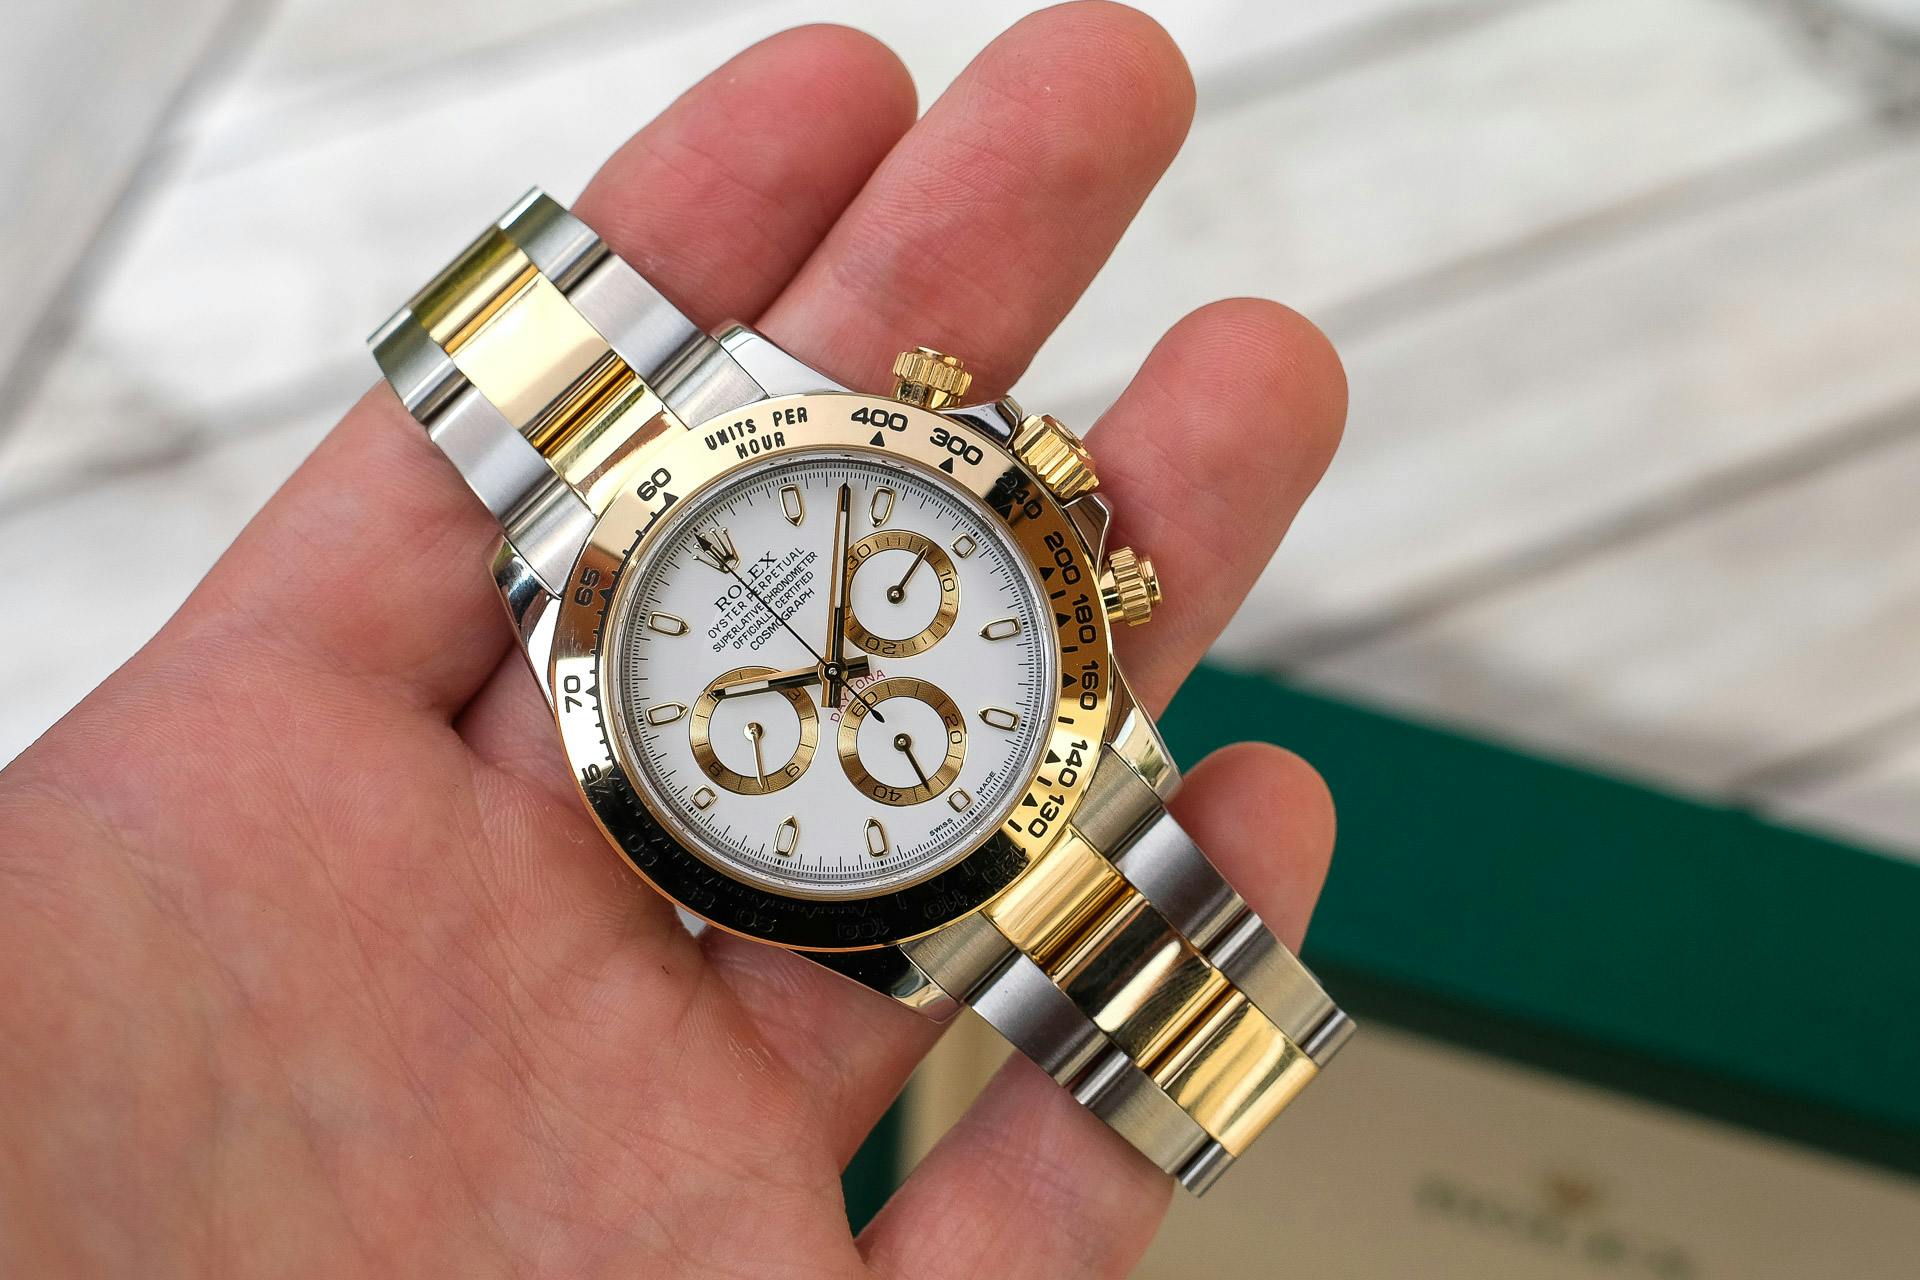 2021 ROLEX DAYTONA for sale auction in Southmoor, Oxfordshire, United Kingdom